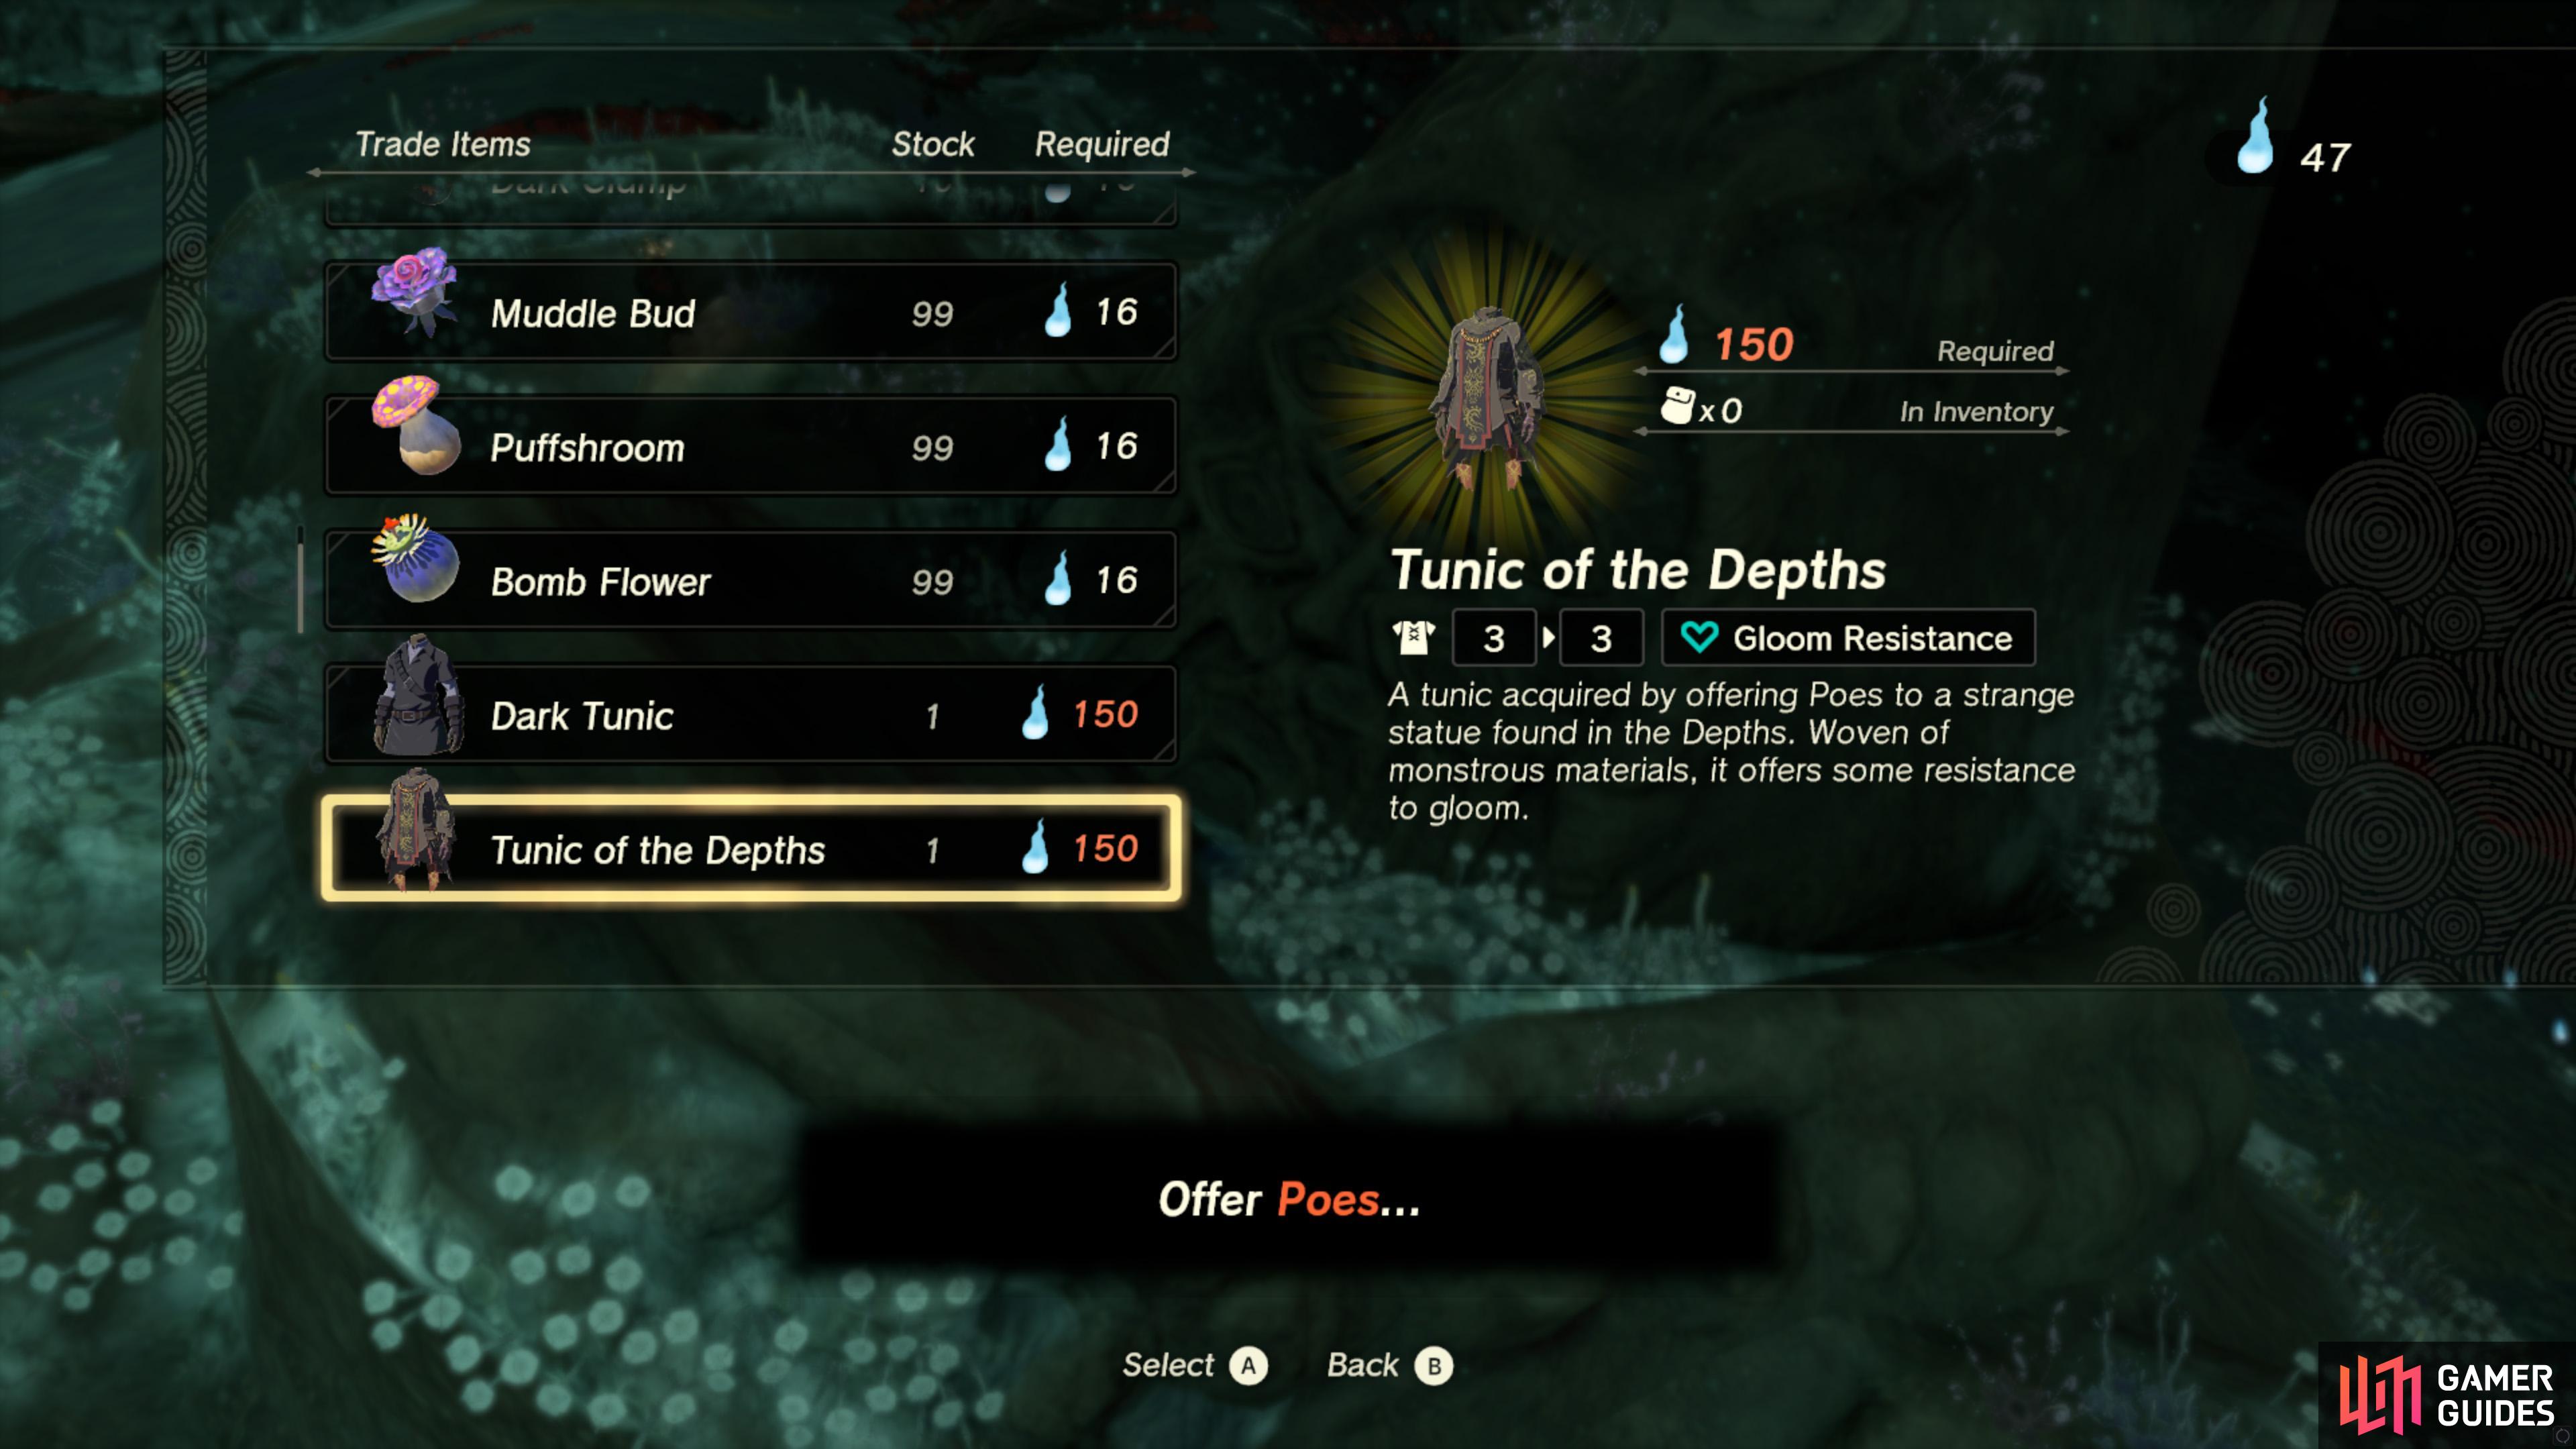 The Tunic of the Depths is the cheapest of the three armor pieces.